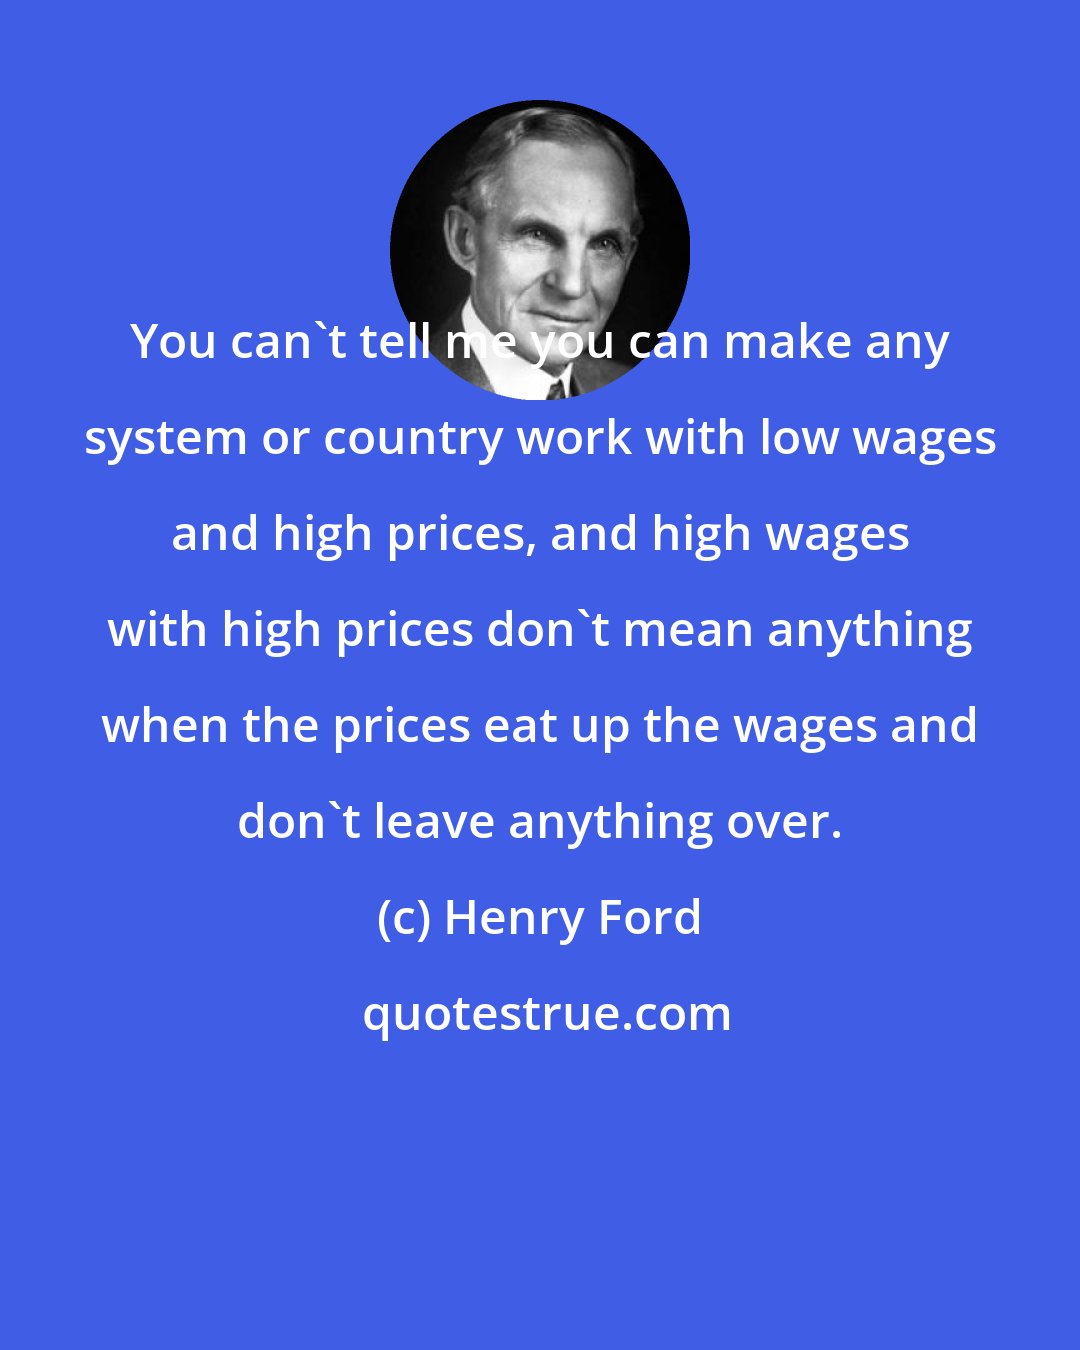 Henry Ford: You can't tell me you can make any system or country work with low wages and high prices, and high wages with high prices don't mean anything when the prices eat up the wages and don't leave anything over.